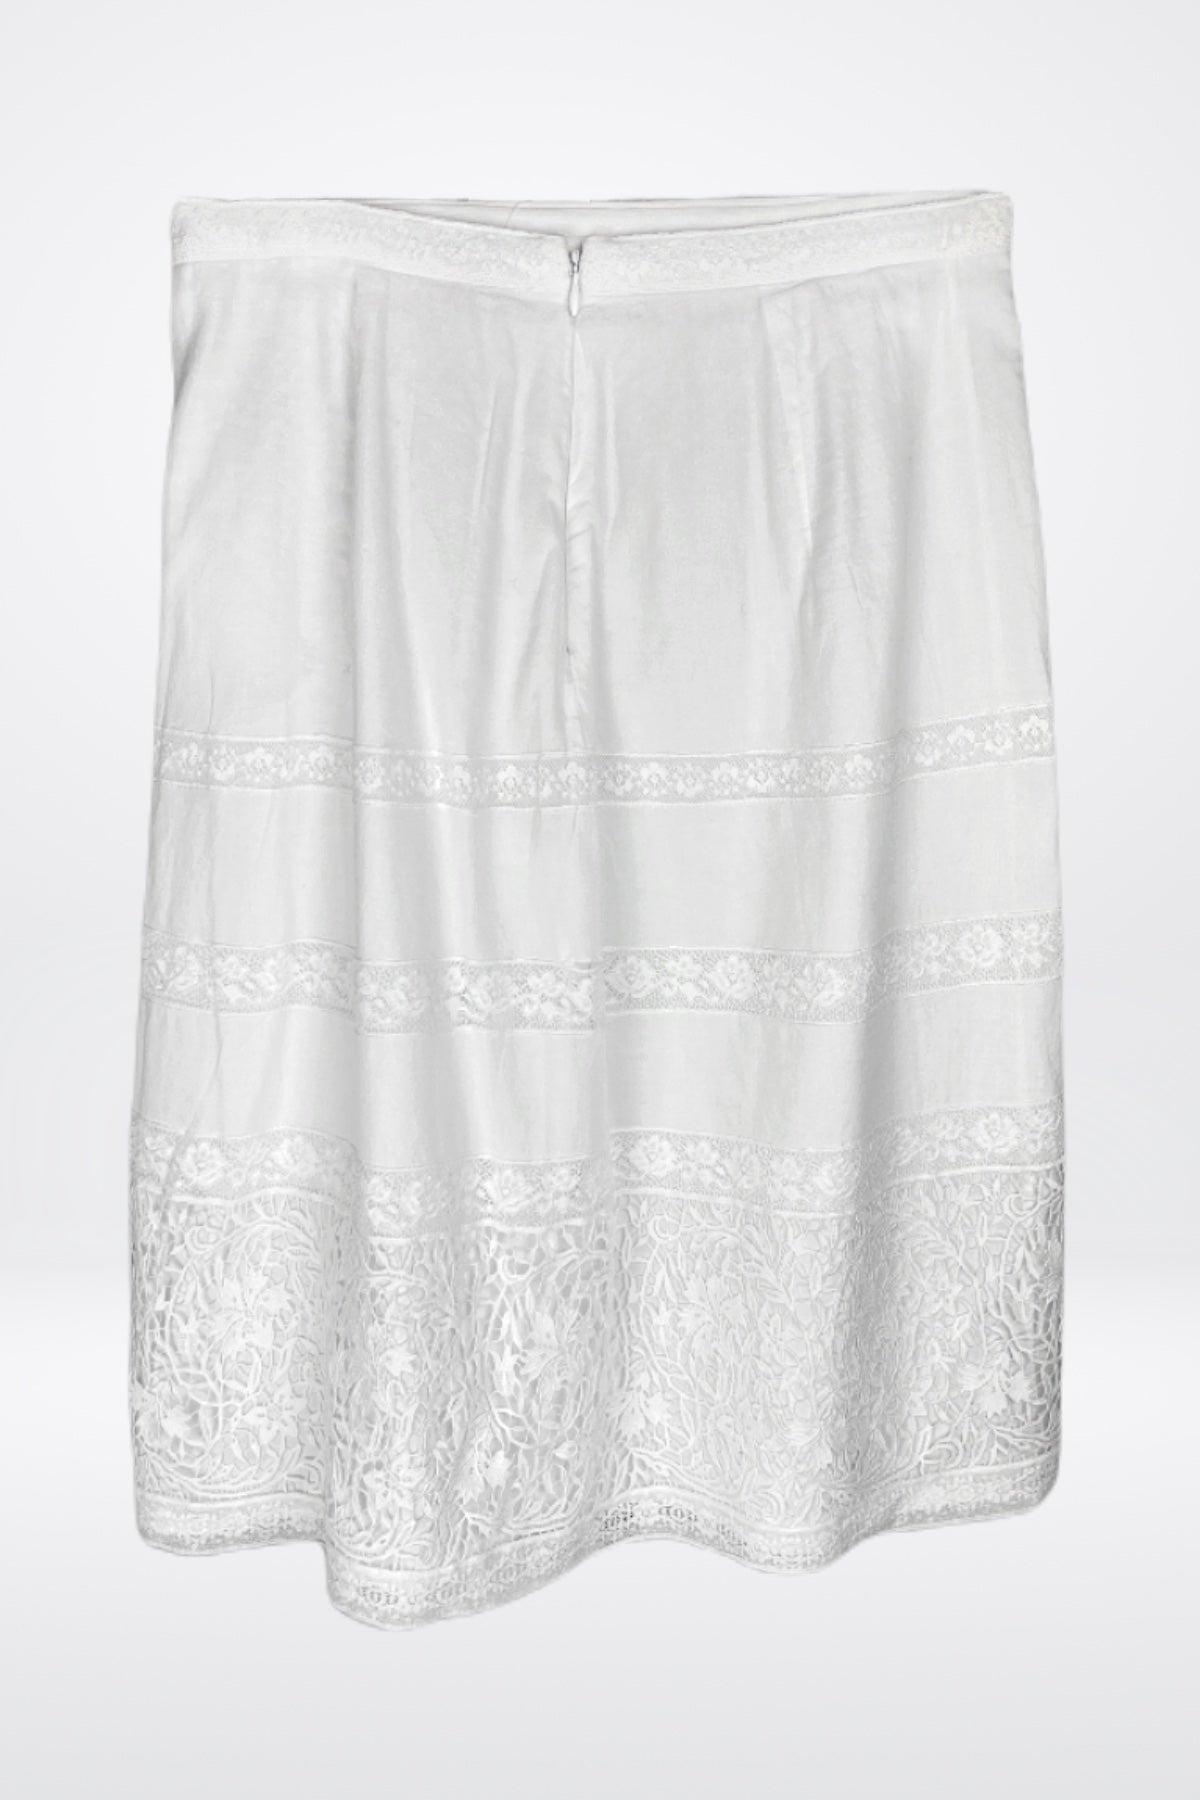 Burberry White Knee Length Skirt with Lace Trim